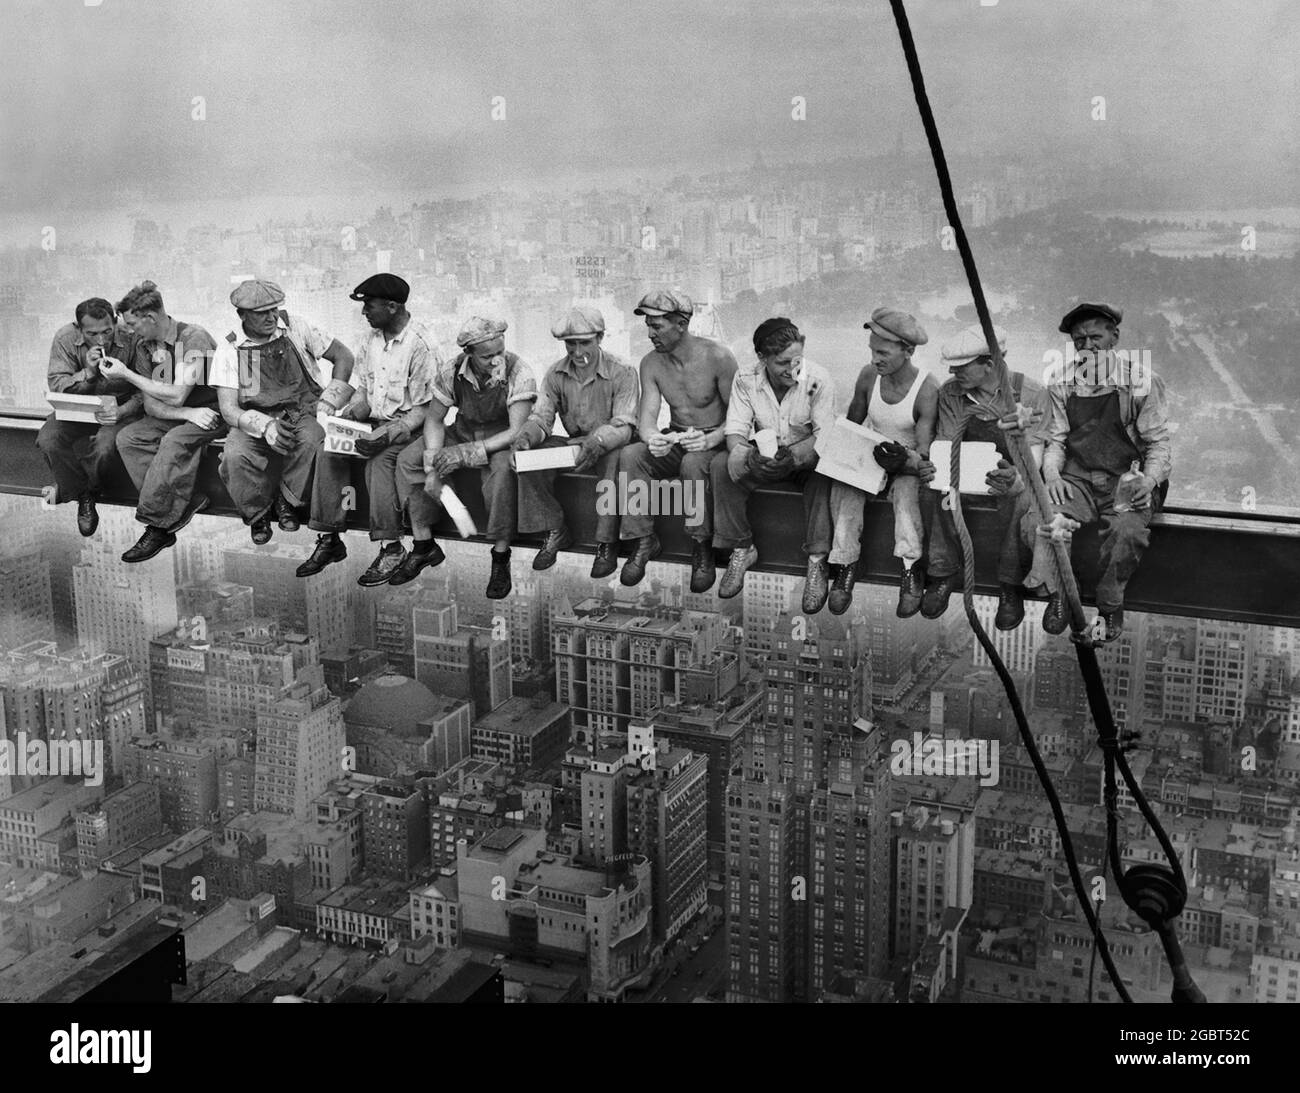 Lunch atop a Skyscraper-New York Construction Workers Lunching on a Crossbeam-is an iconic photograph taken atop the ironwork of 30 Rockefeller Plaza. Stock Photo